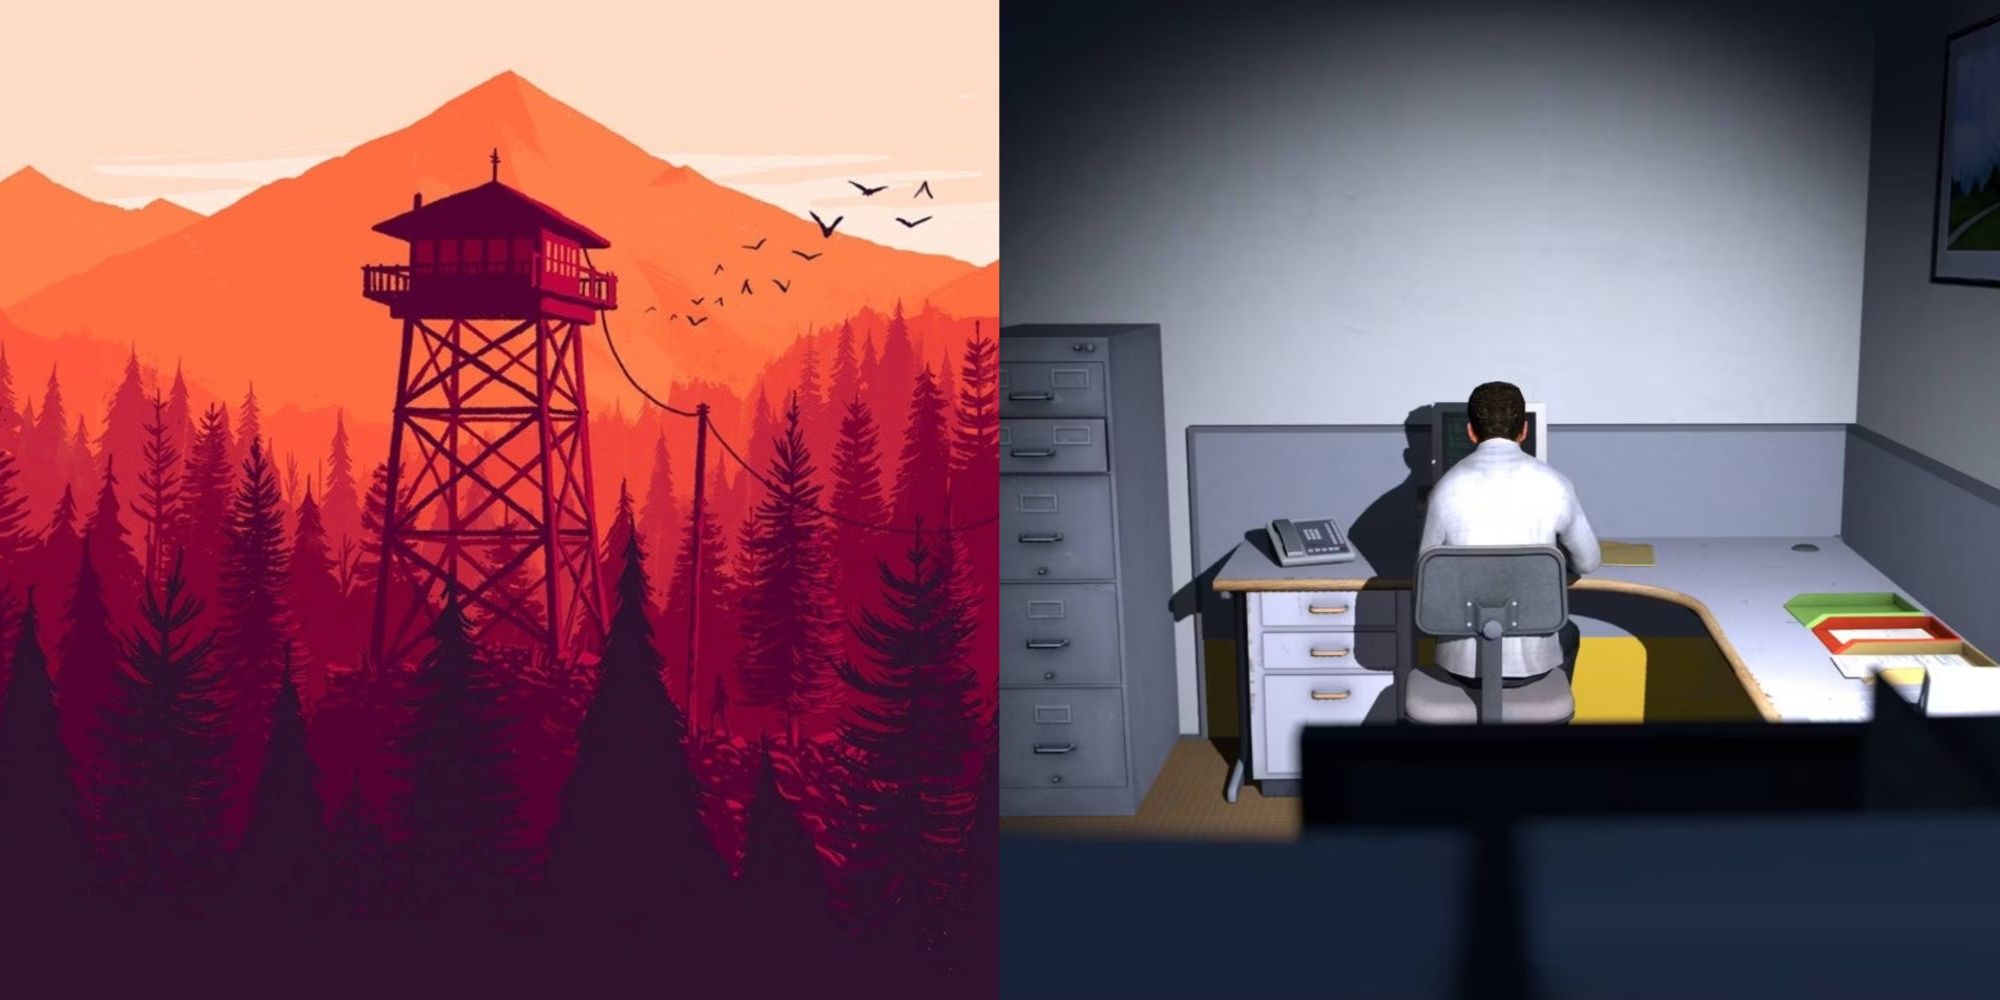 Cover art for Firewatch and promo screenshot of The Stanley Parable